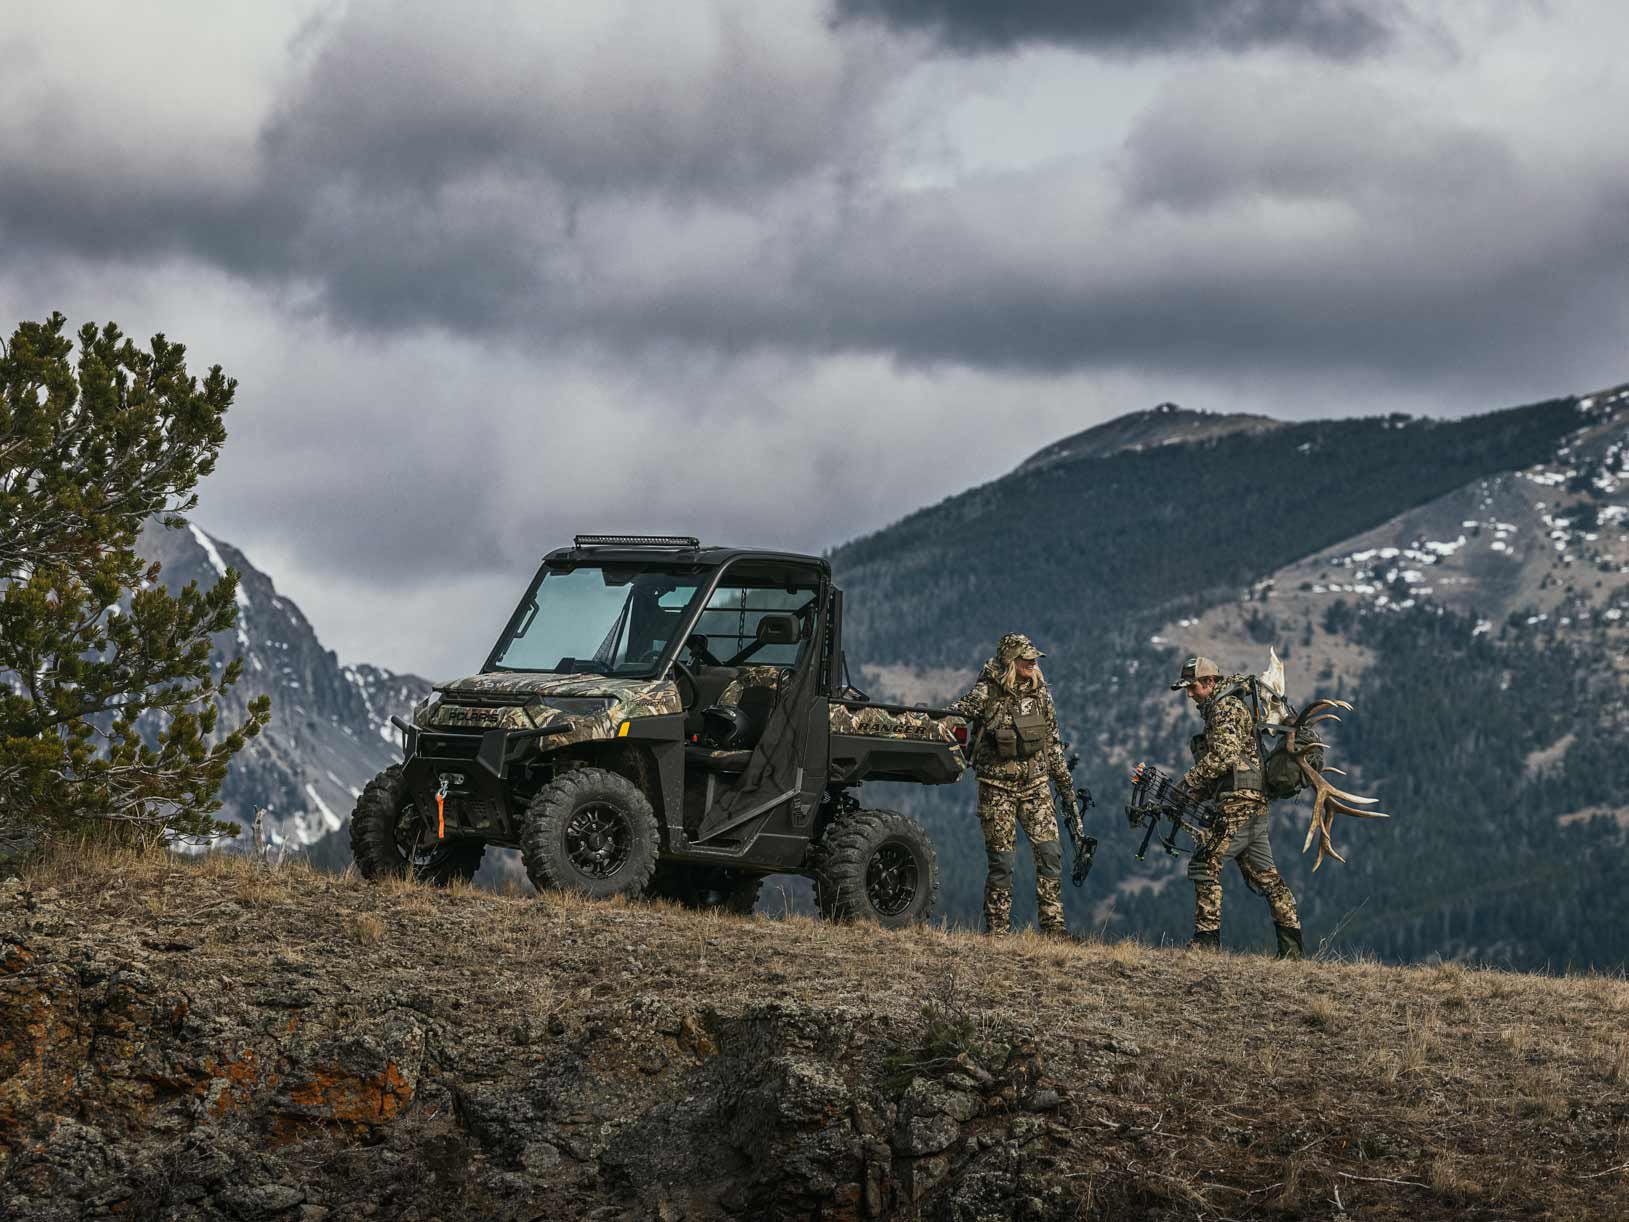 With up to 80 miles of range, reaching far-flung hunting spots without spooking deer or elk should be much easier.